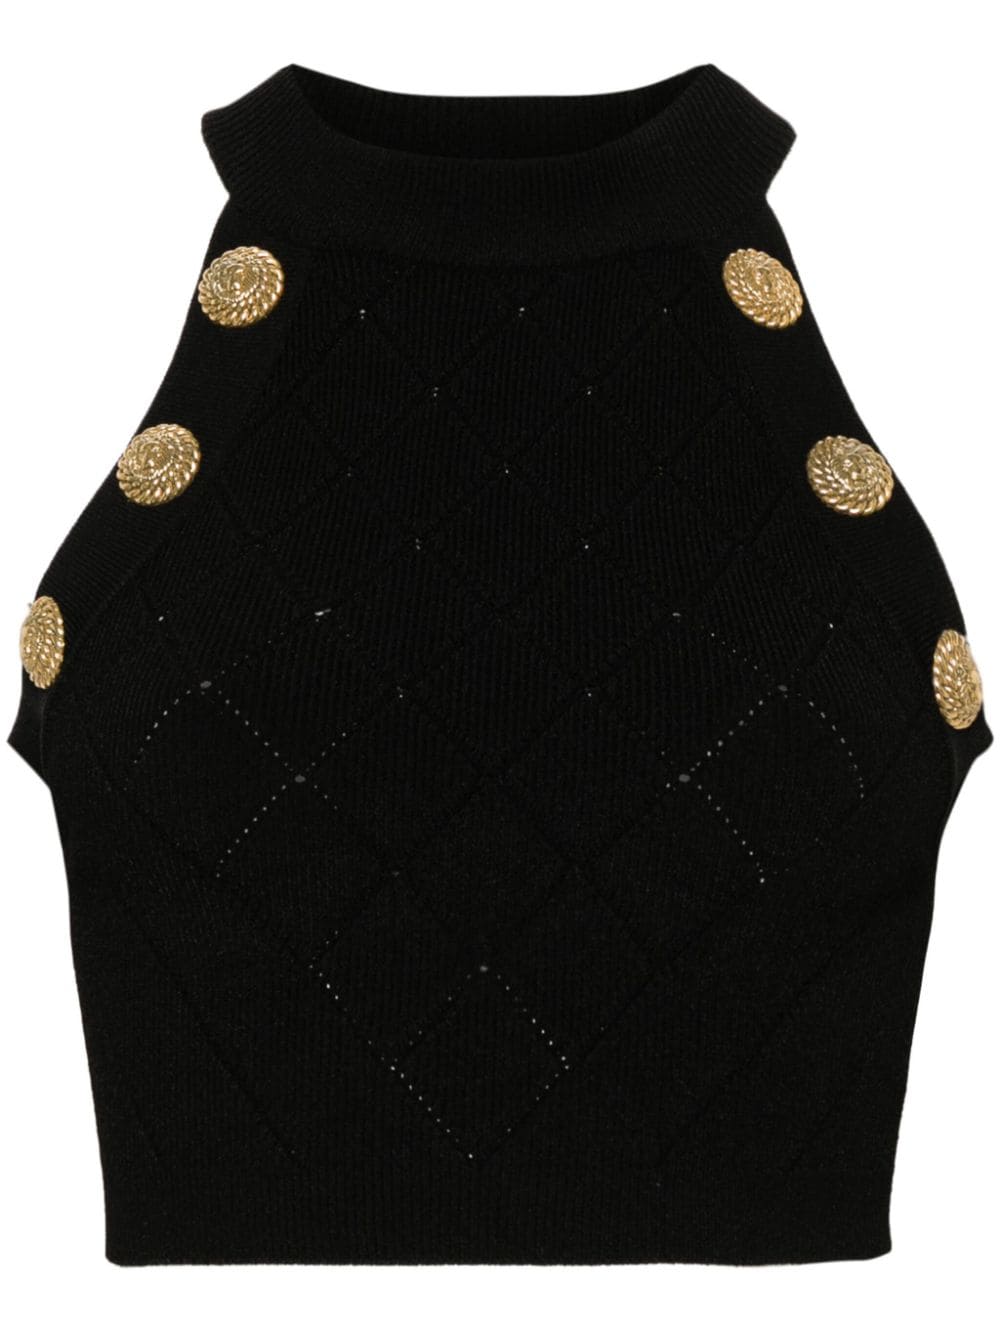 BALMAIN Diamond Patterned Halterneck Top for Women - Sophisticated and Luxurious